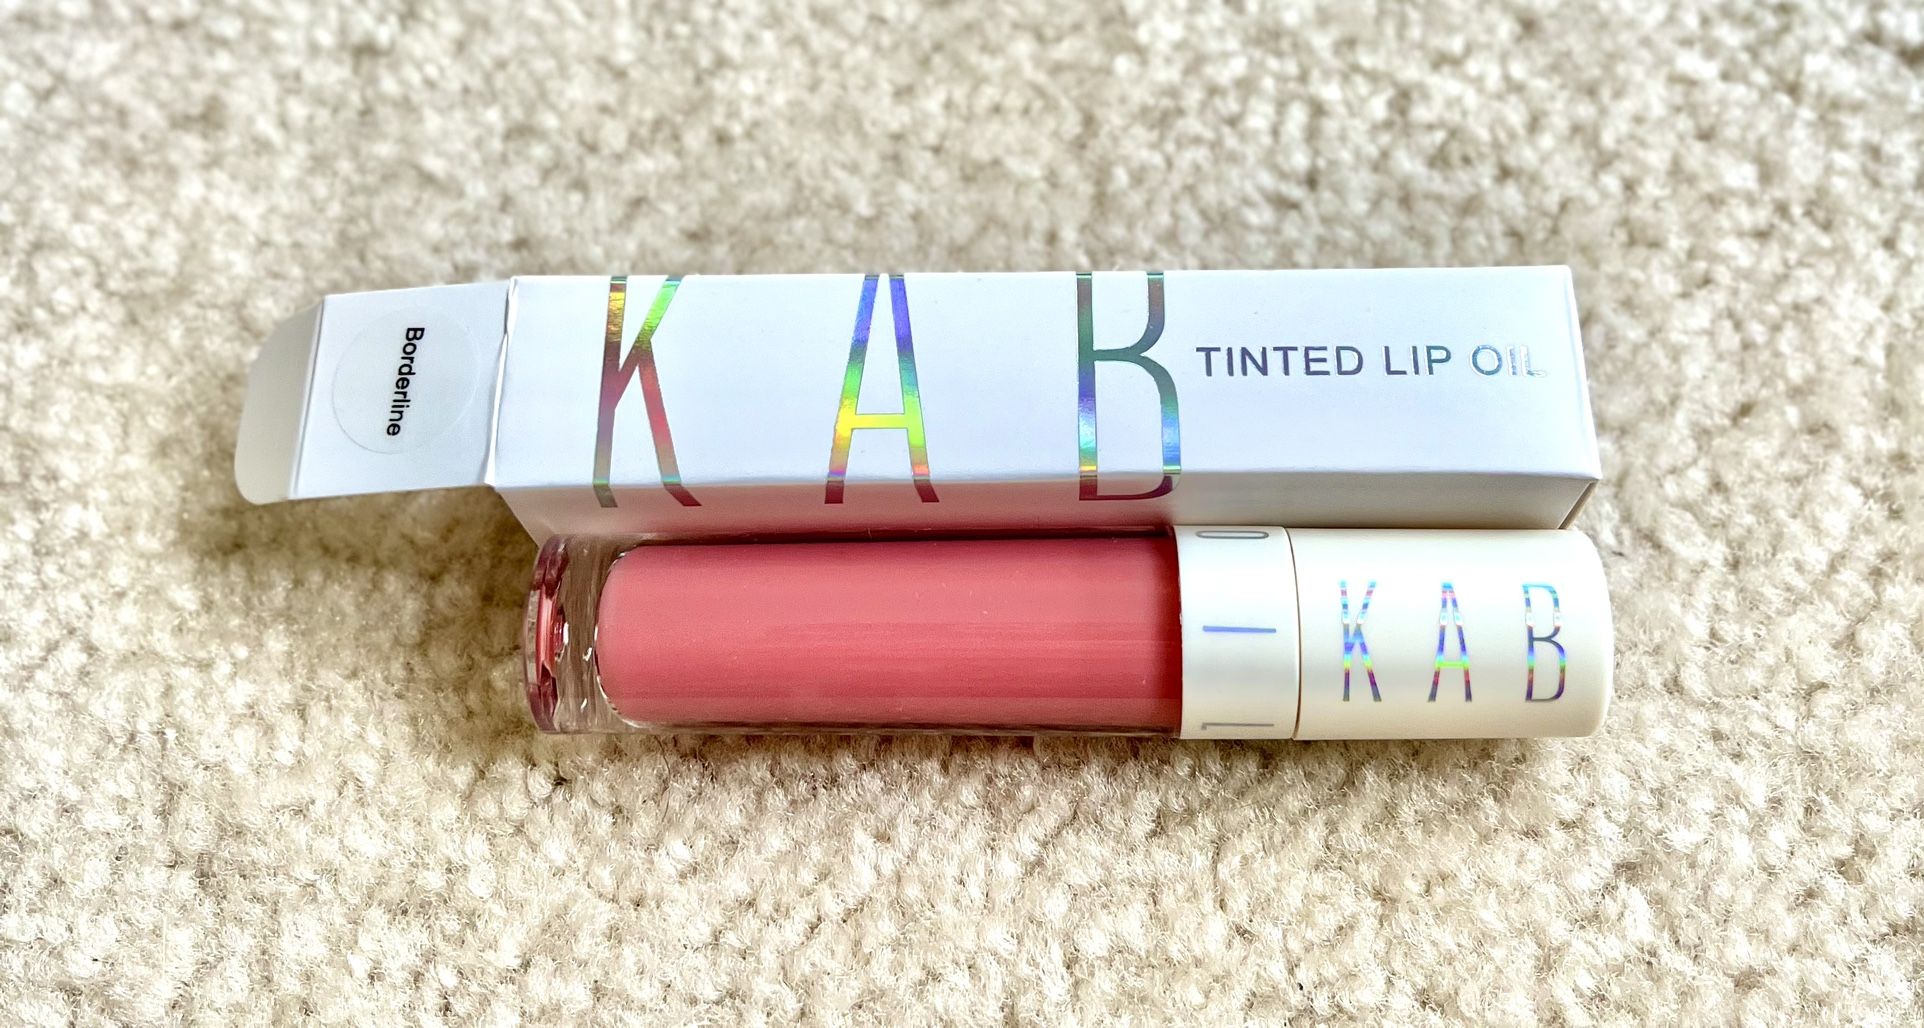 HYDRATING TINTED LIP OILS “Borderline” by KAB Cosmetics